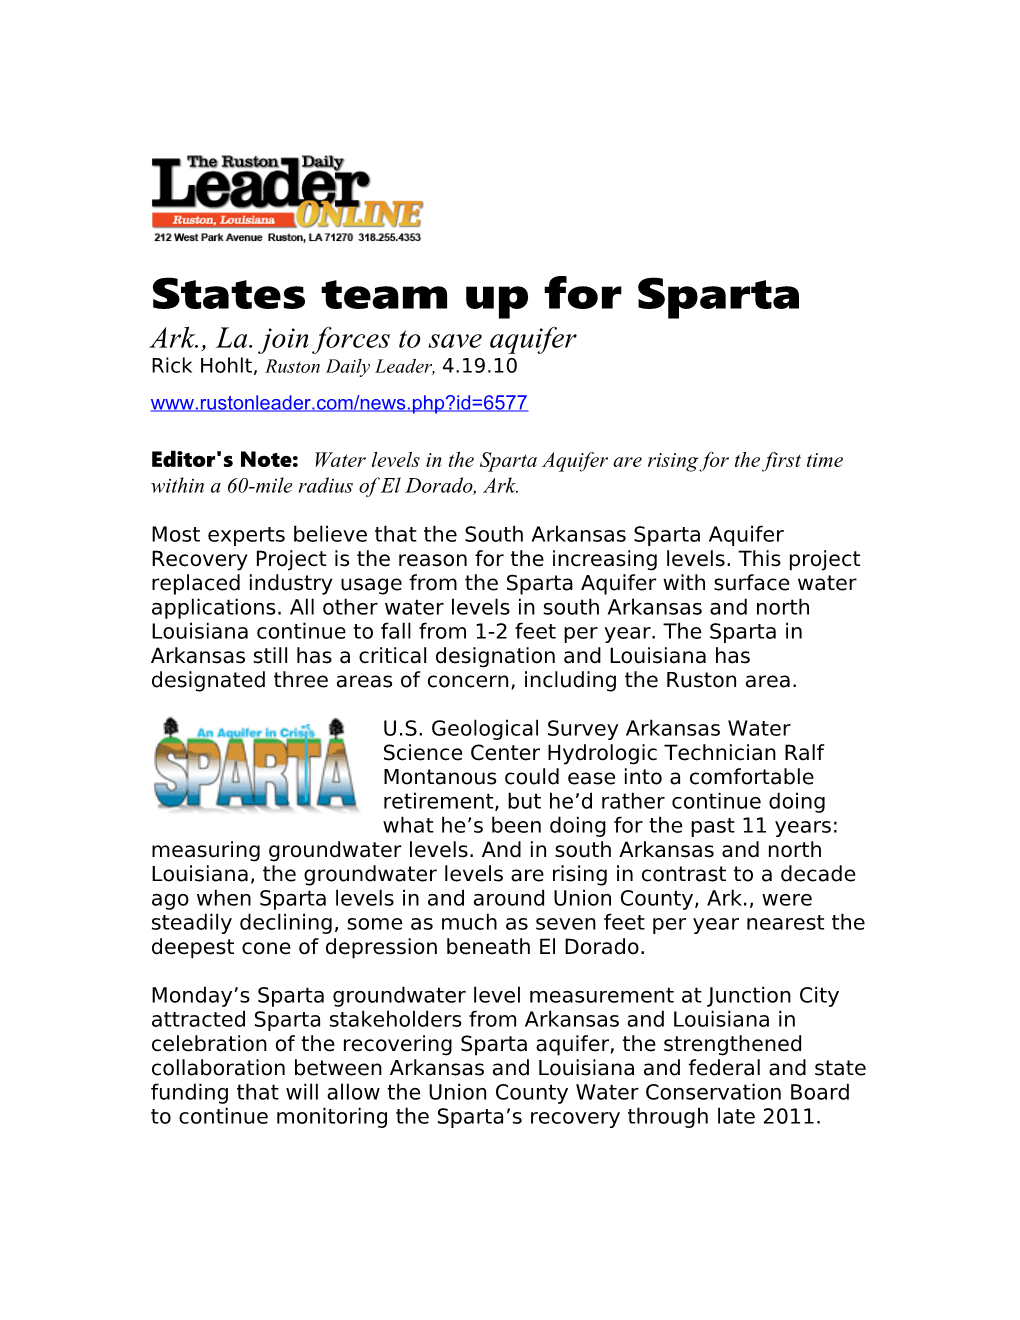 States Team up for Sparta